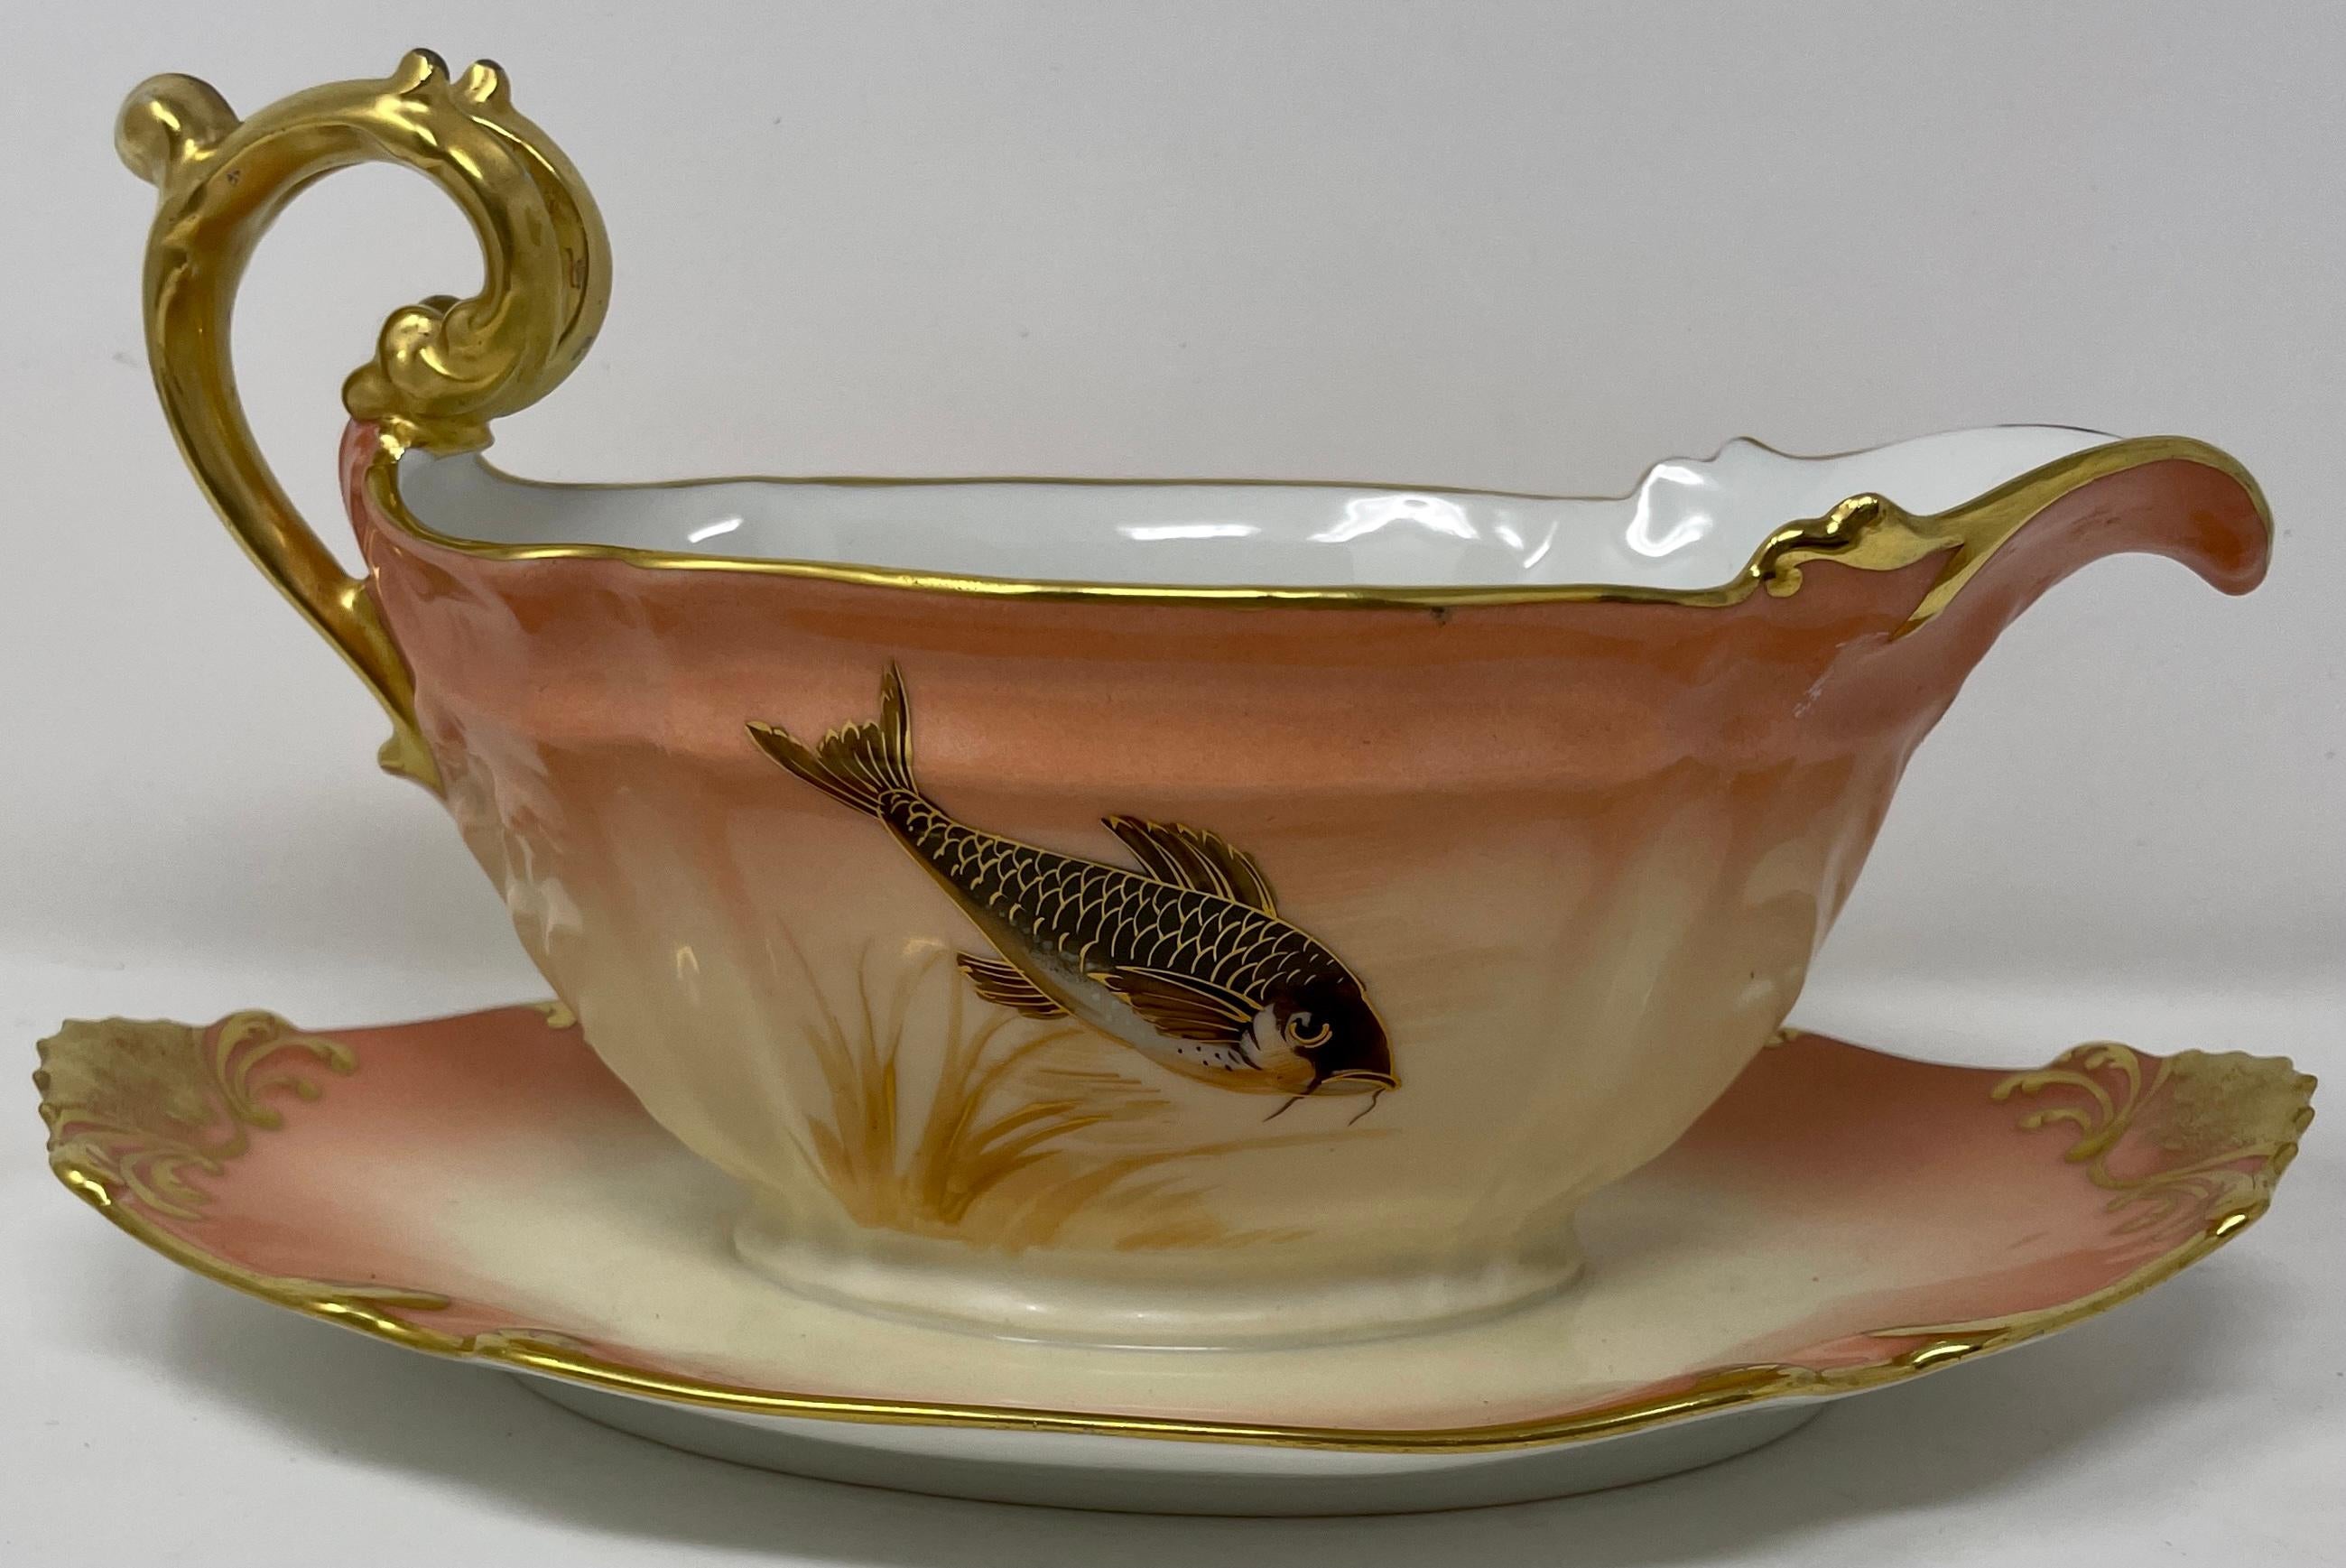 Set of 14 Antique French Hand-Painted Limoges Porcelain Fish Service, Circa 1890 For Sale 1